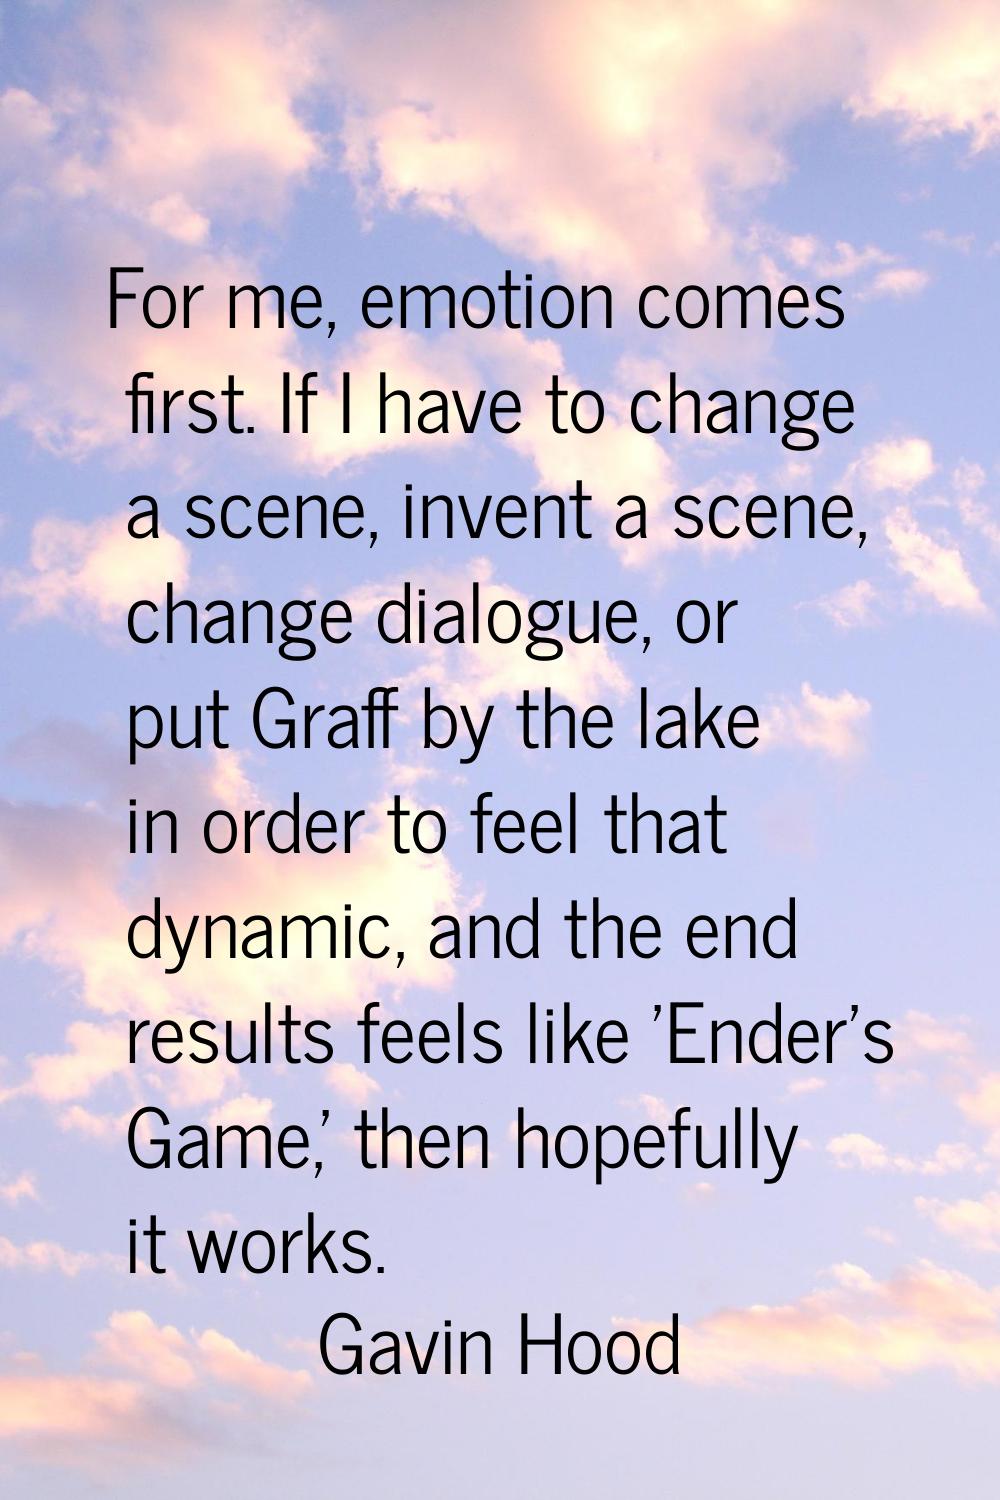 For me, emotion comes first. If I have to change a scene, invent a scene, change dialogue, or put G